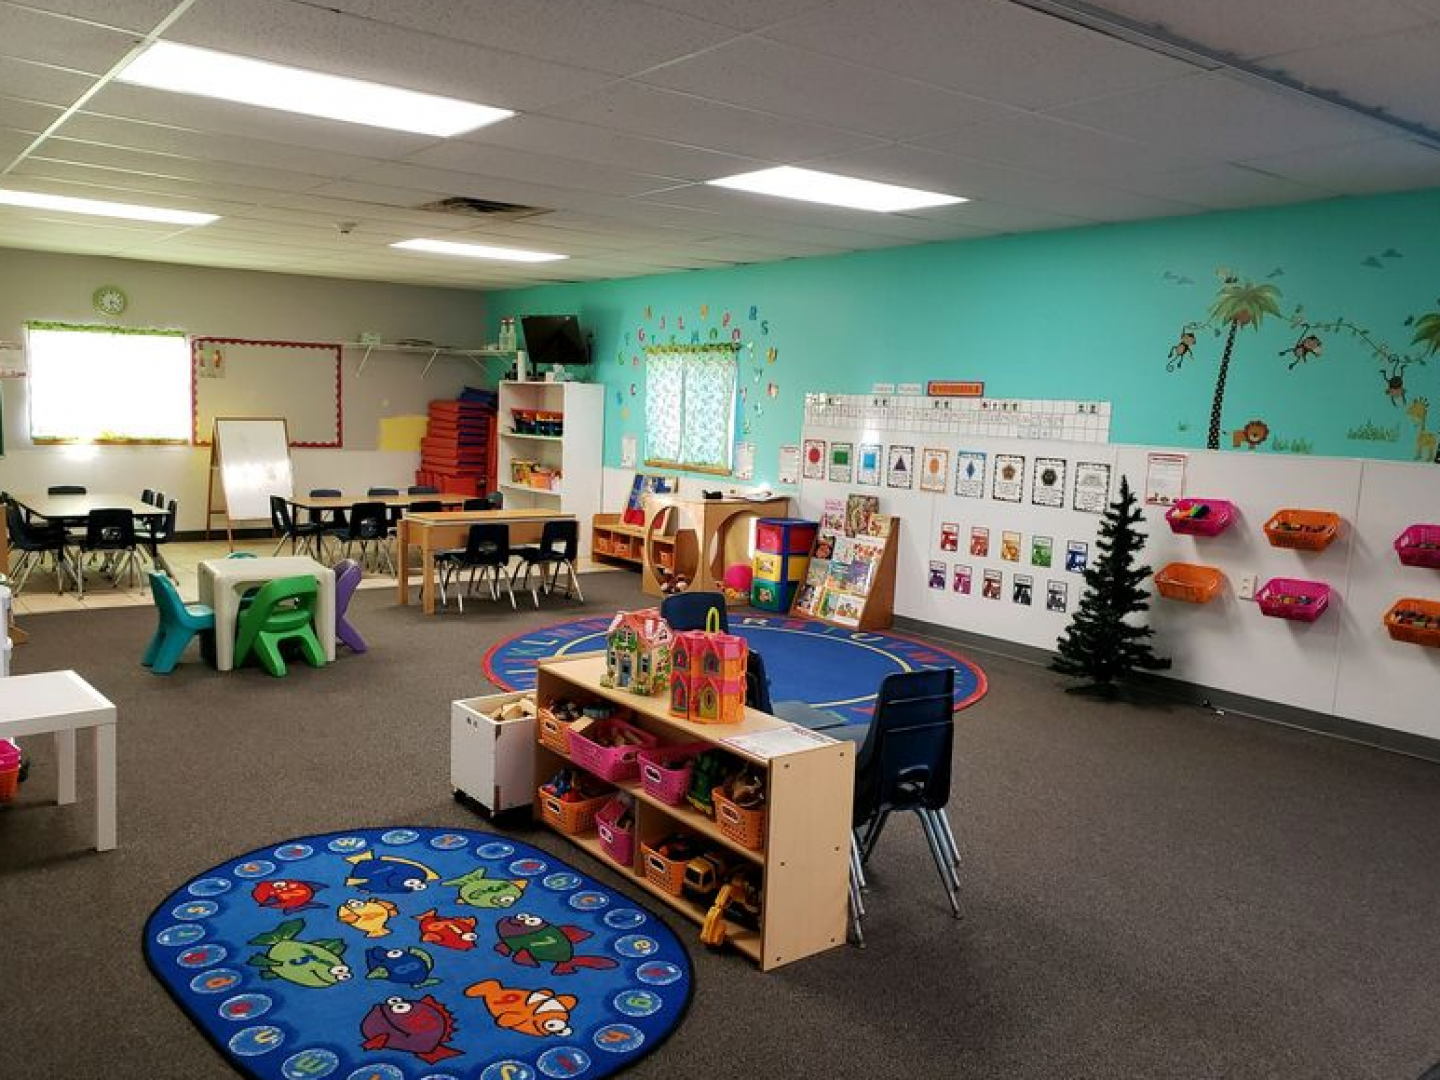 toodlers rooms, students age 3-4, pre-k